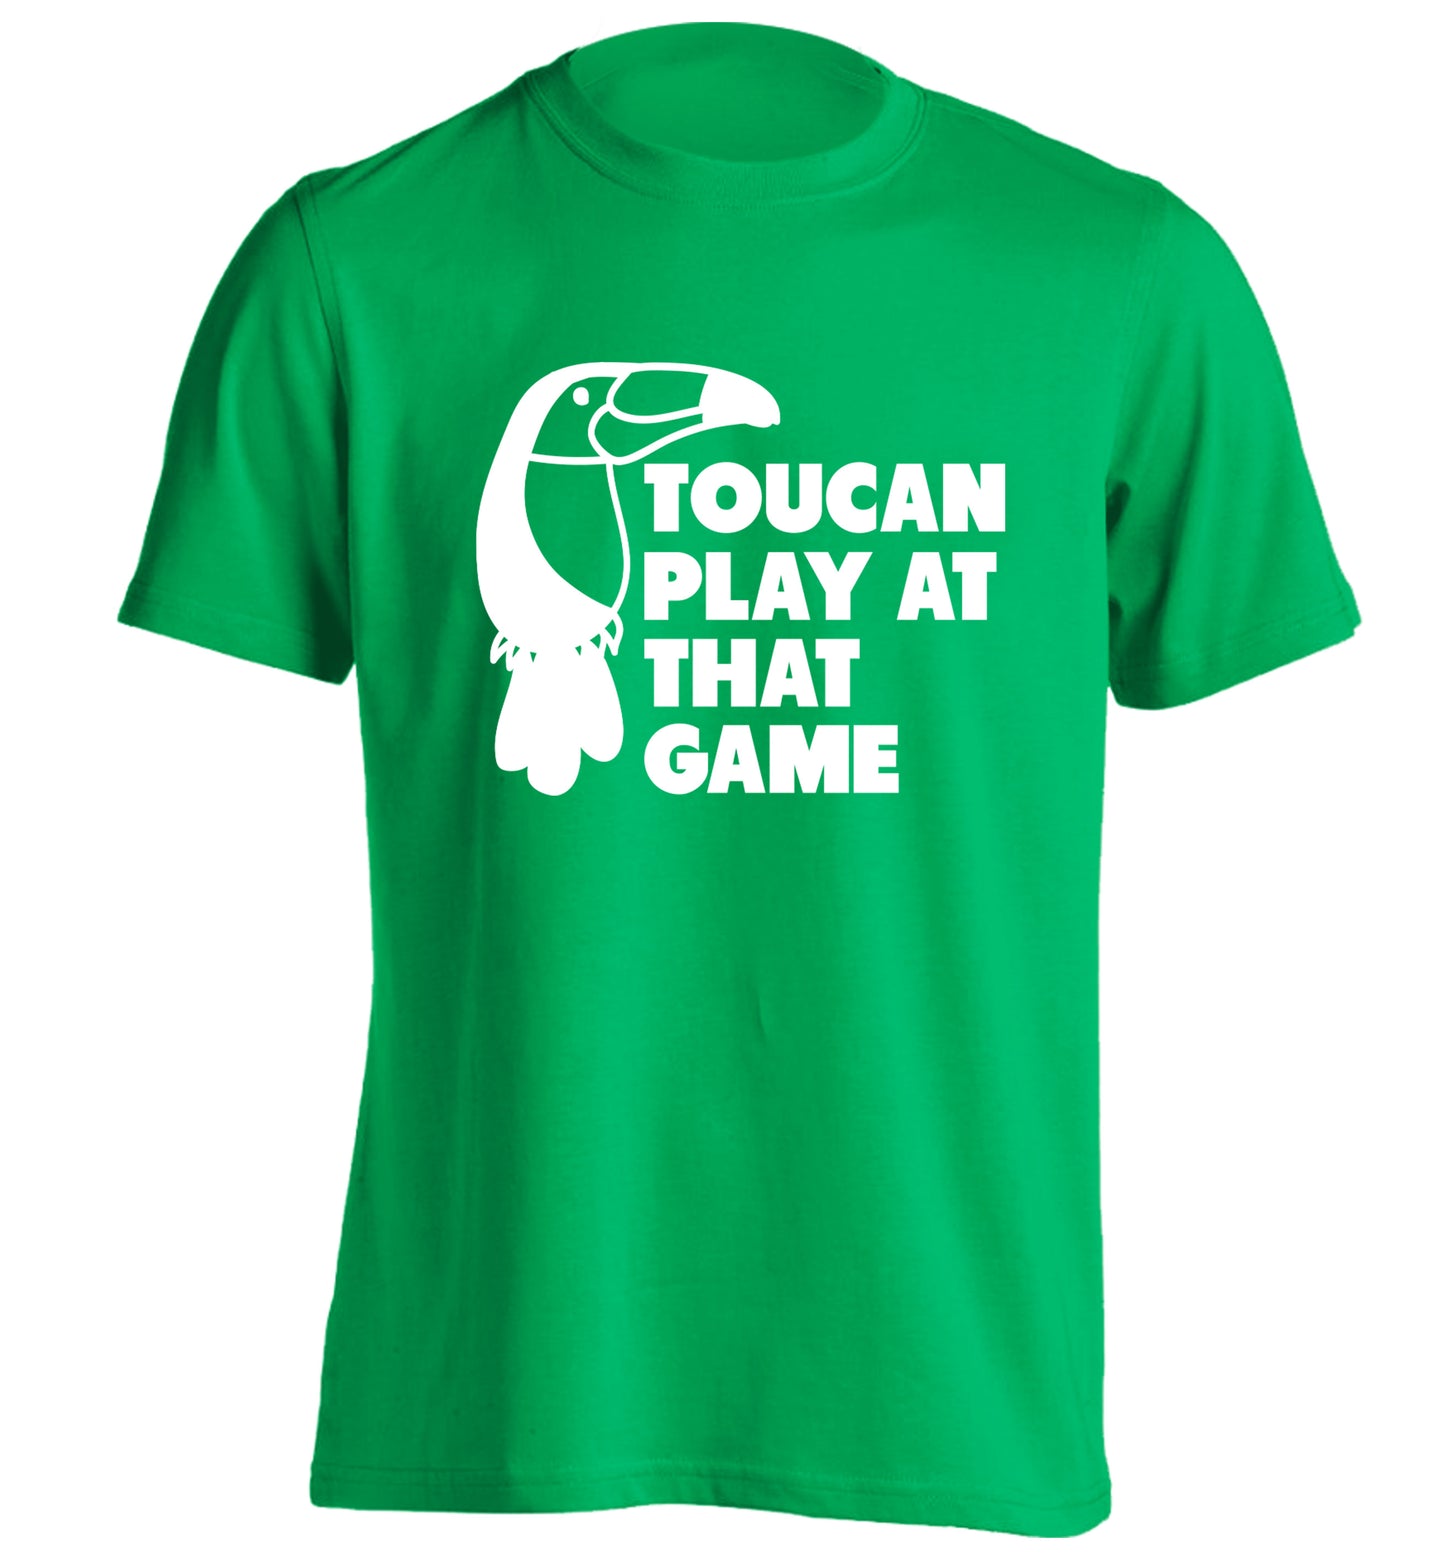 Toucan play at that game adults unisex green Tshirt 2XL